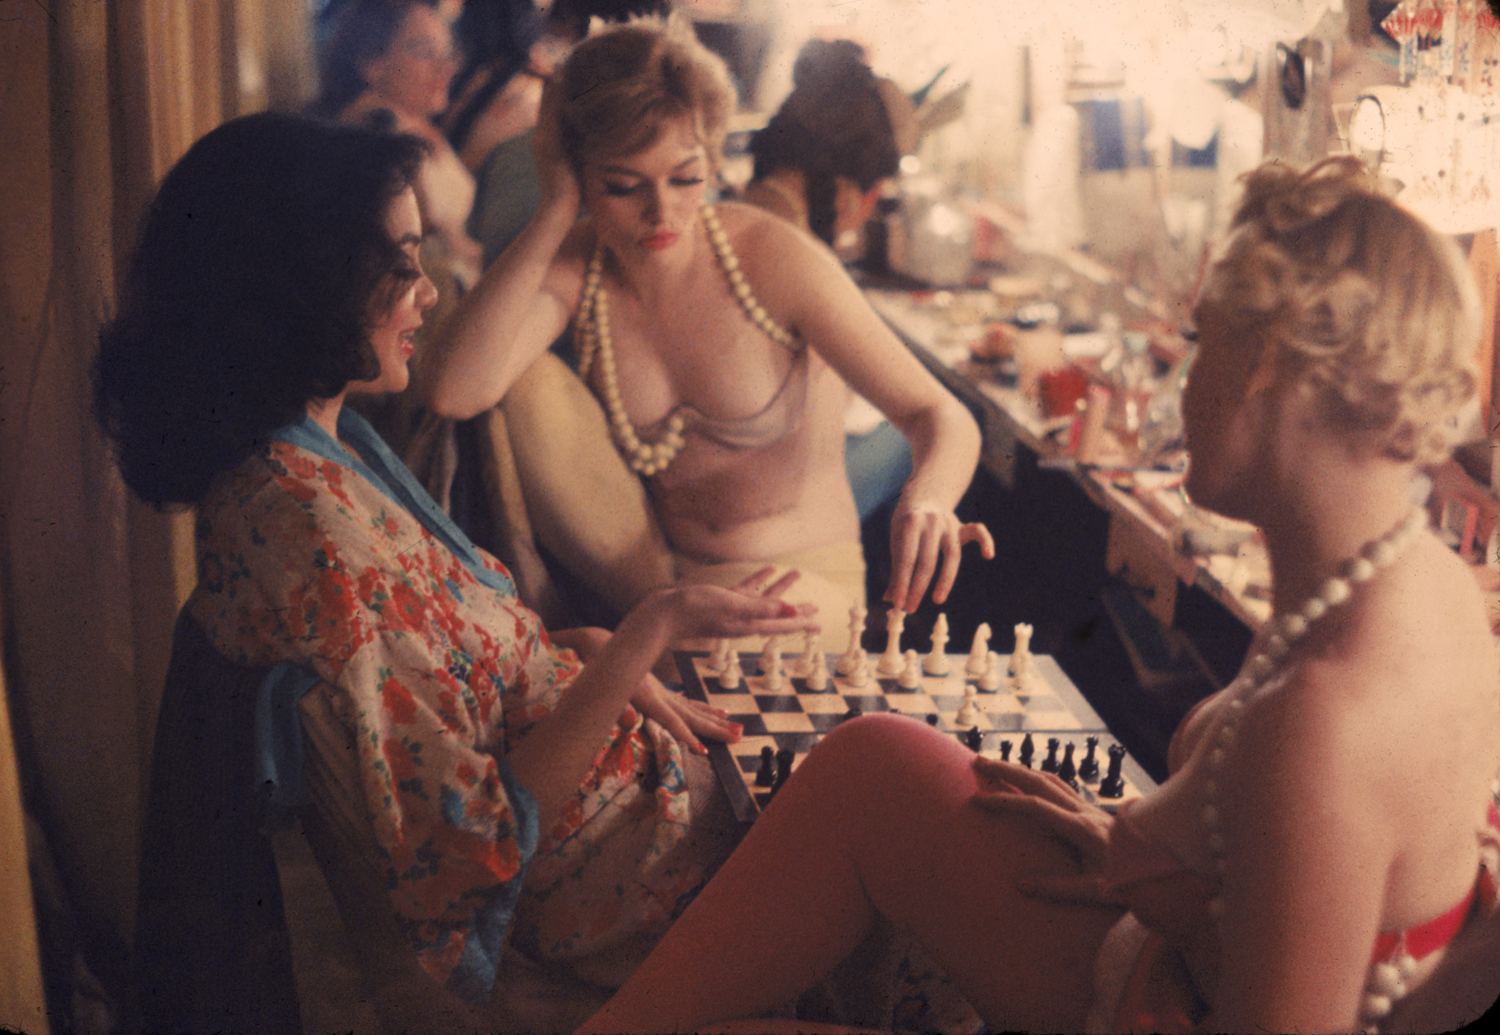 Between scenes in the show at New York's Latin Quarter, Pat Farrell prepares to make a chess move. Opponent (right) is Grace Sundstrom. Kibitzing at left is Shirley Forrest, an ex-schoolteacher.